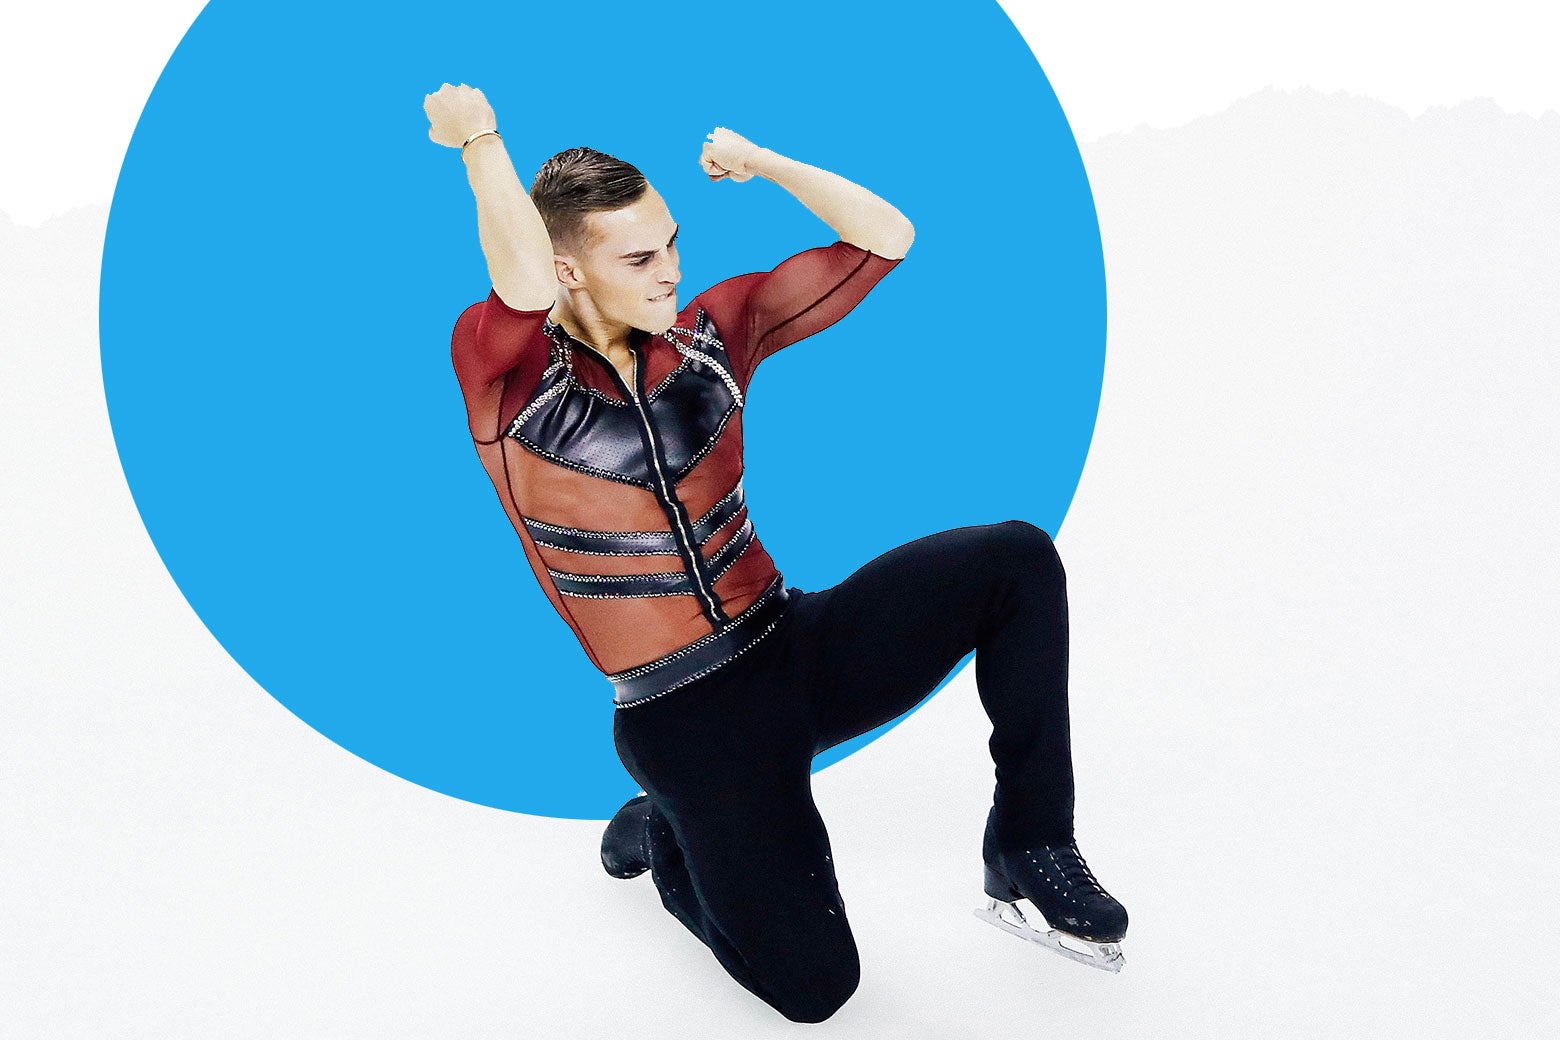 Adam Rippon skating in a red leather shirt.